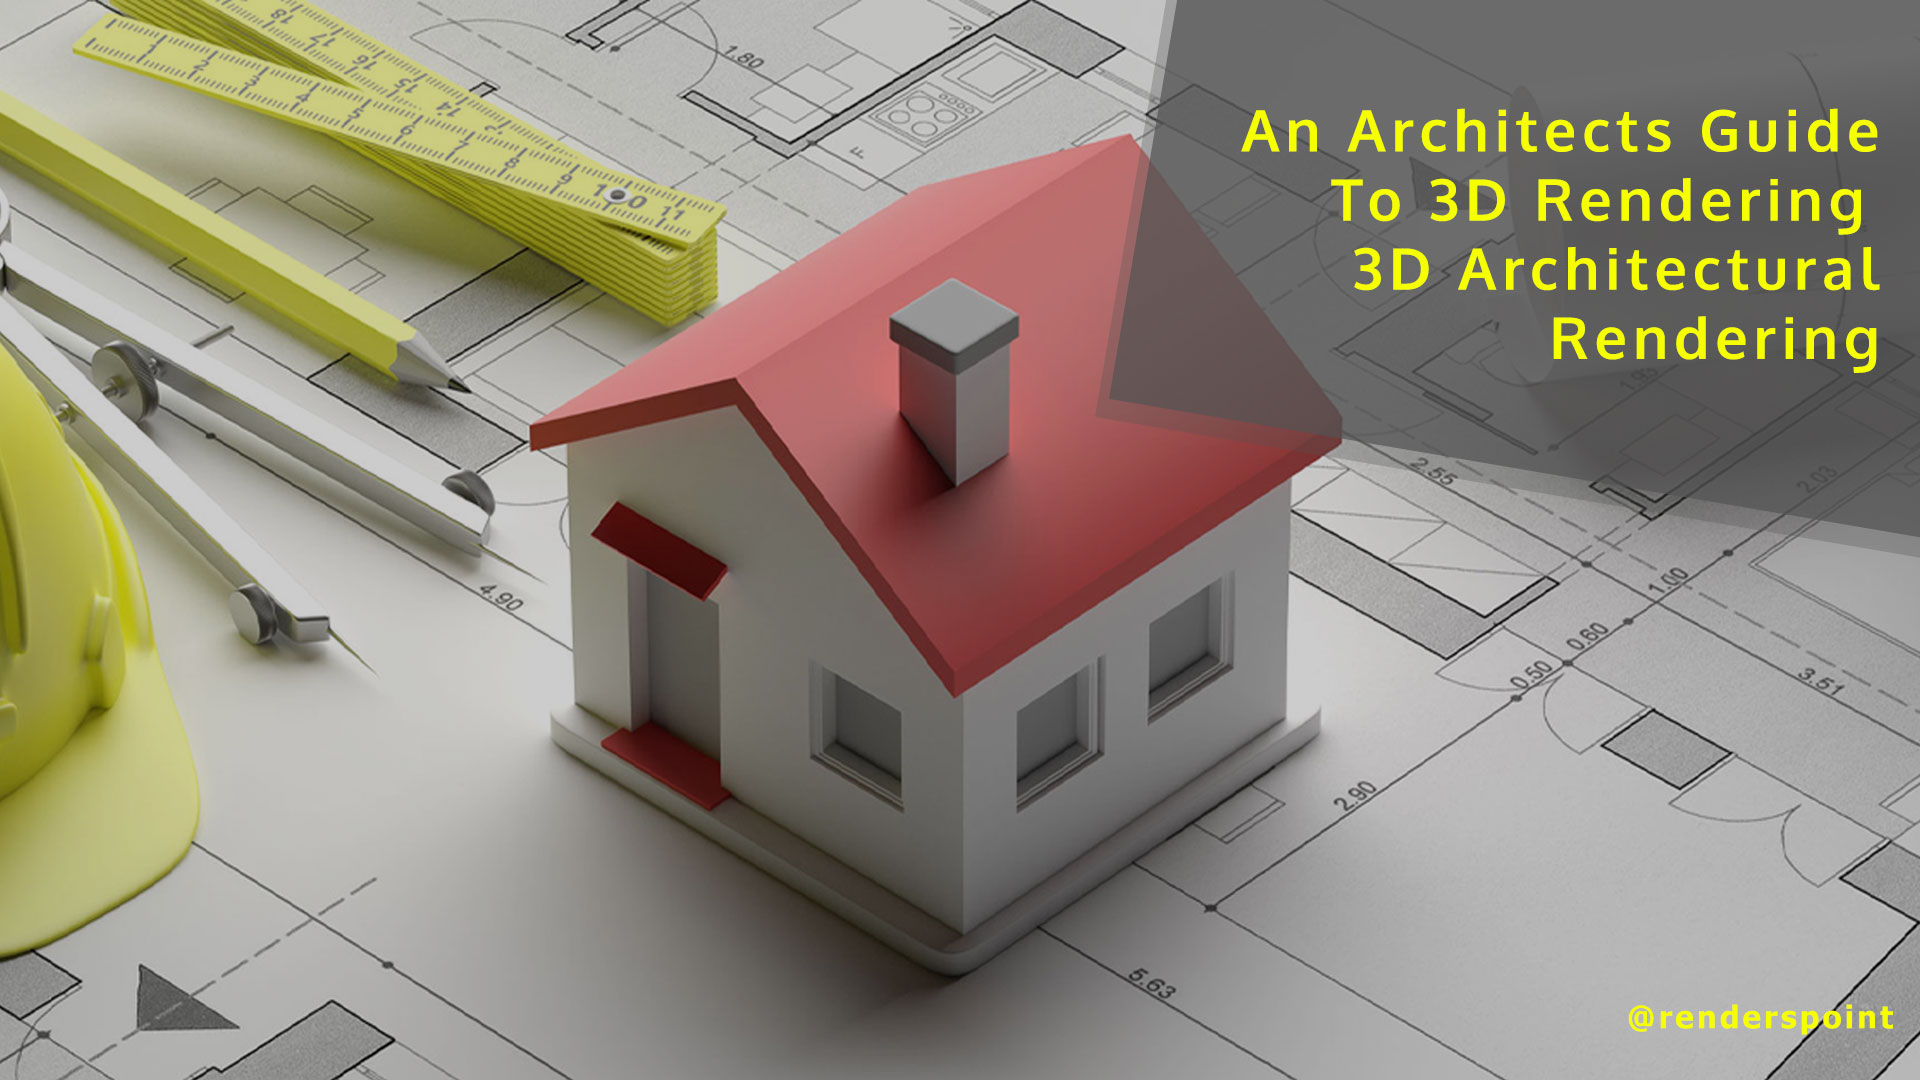 An Architects Guide To 3D Rendering : 3D Architectural Rendering